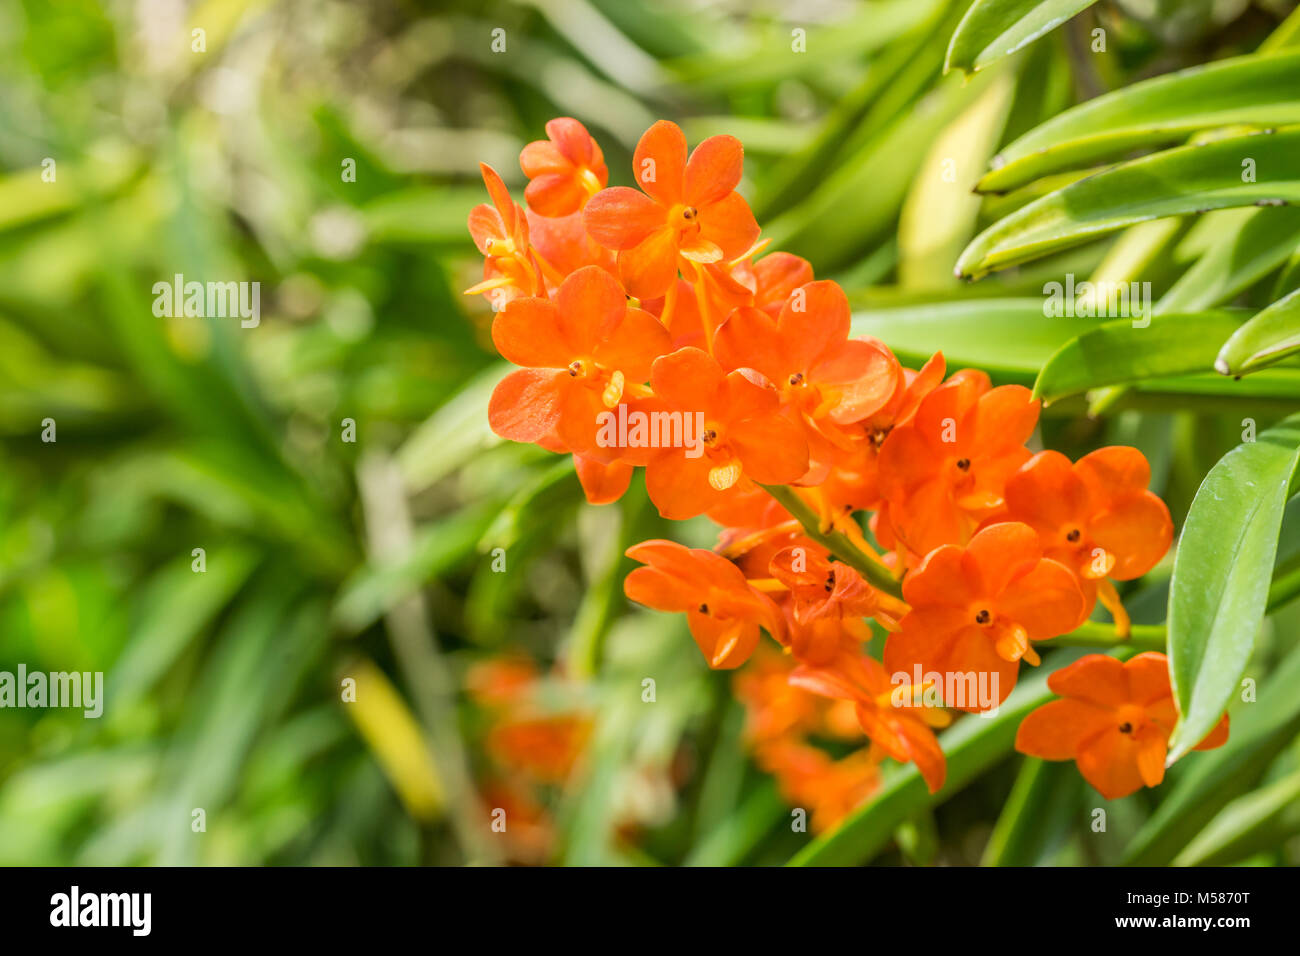 Closeup orange orchid flower in flower plant selectively focus Stock Photo